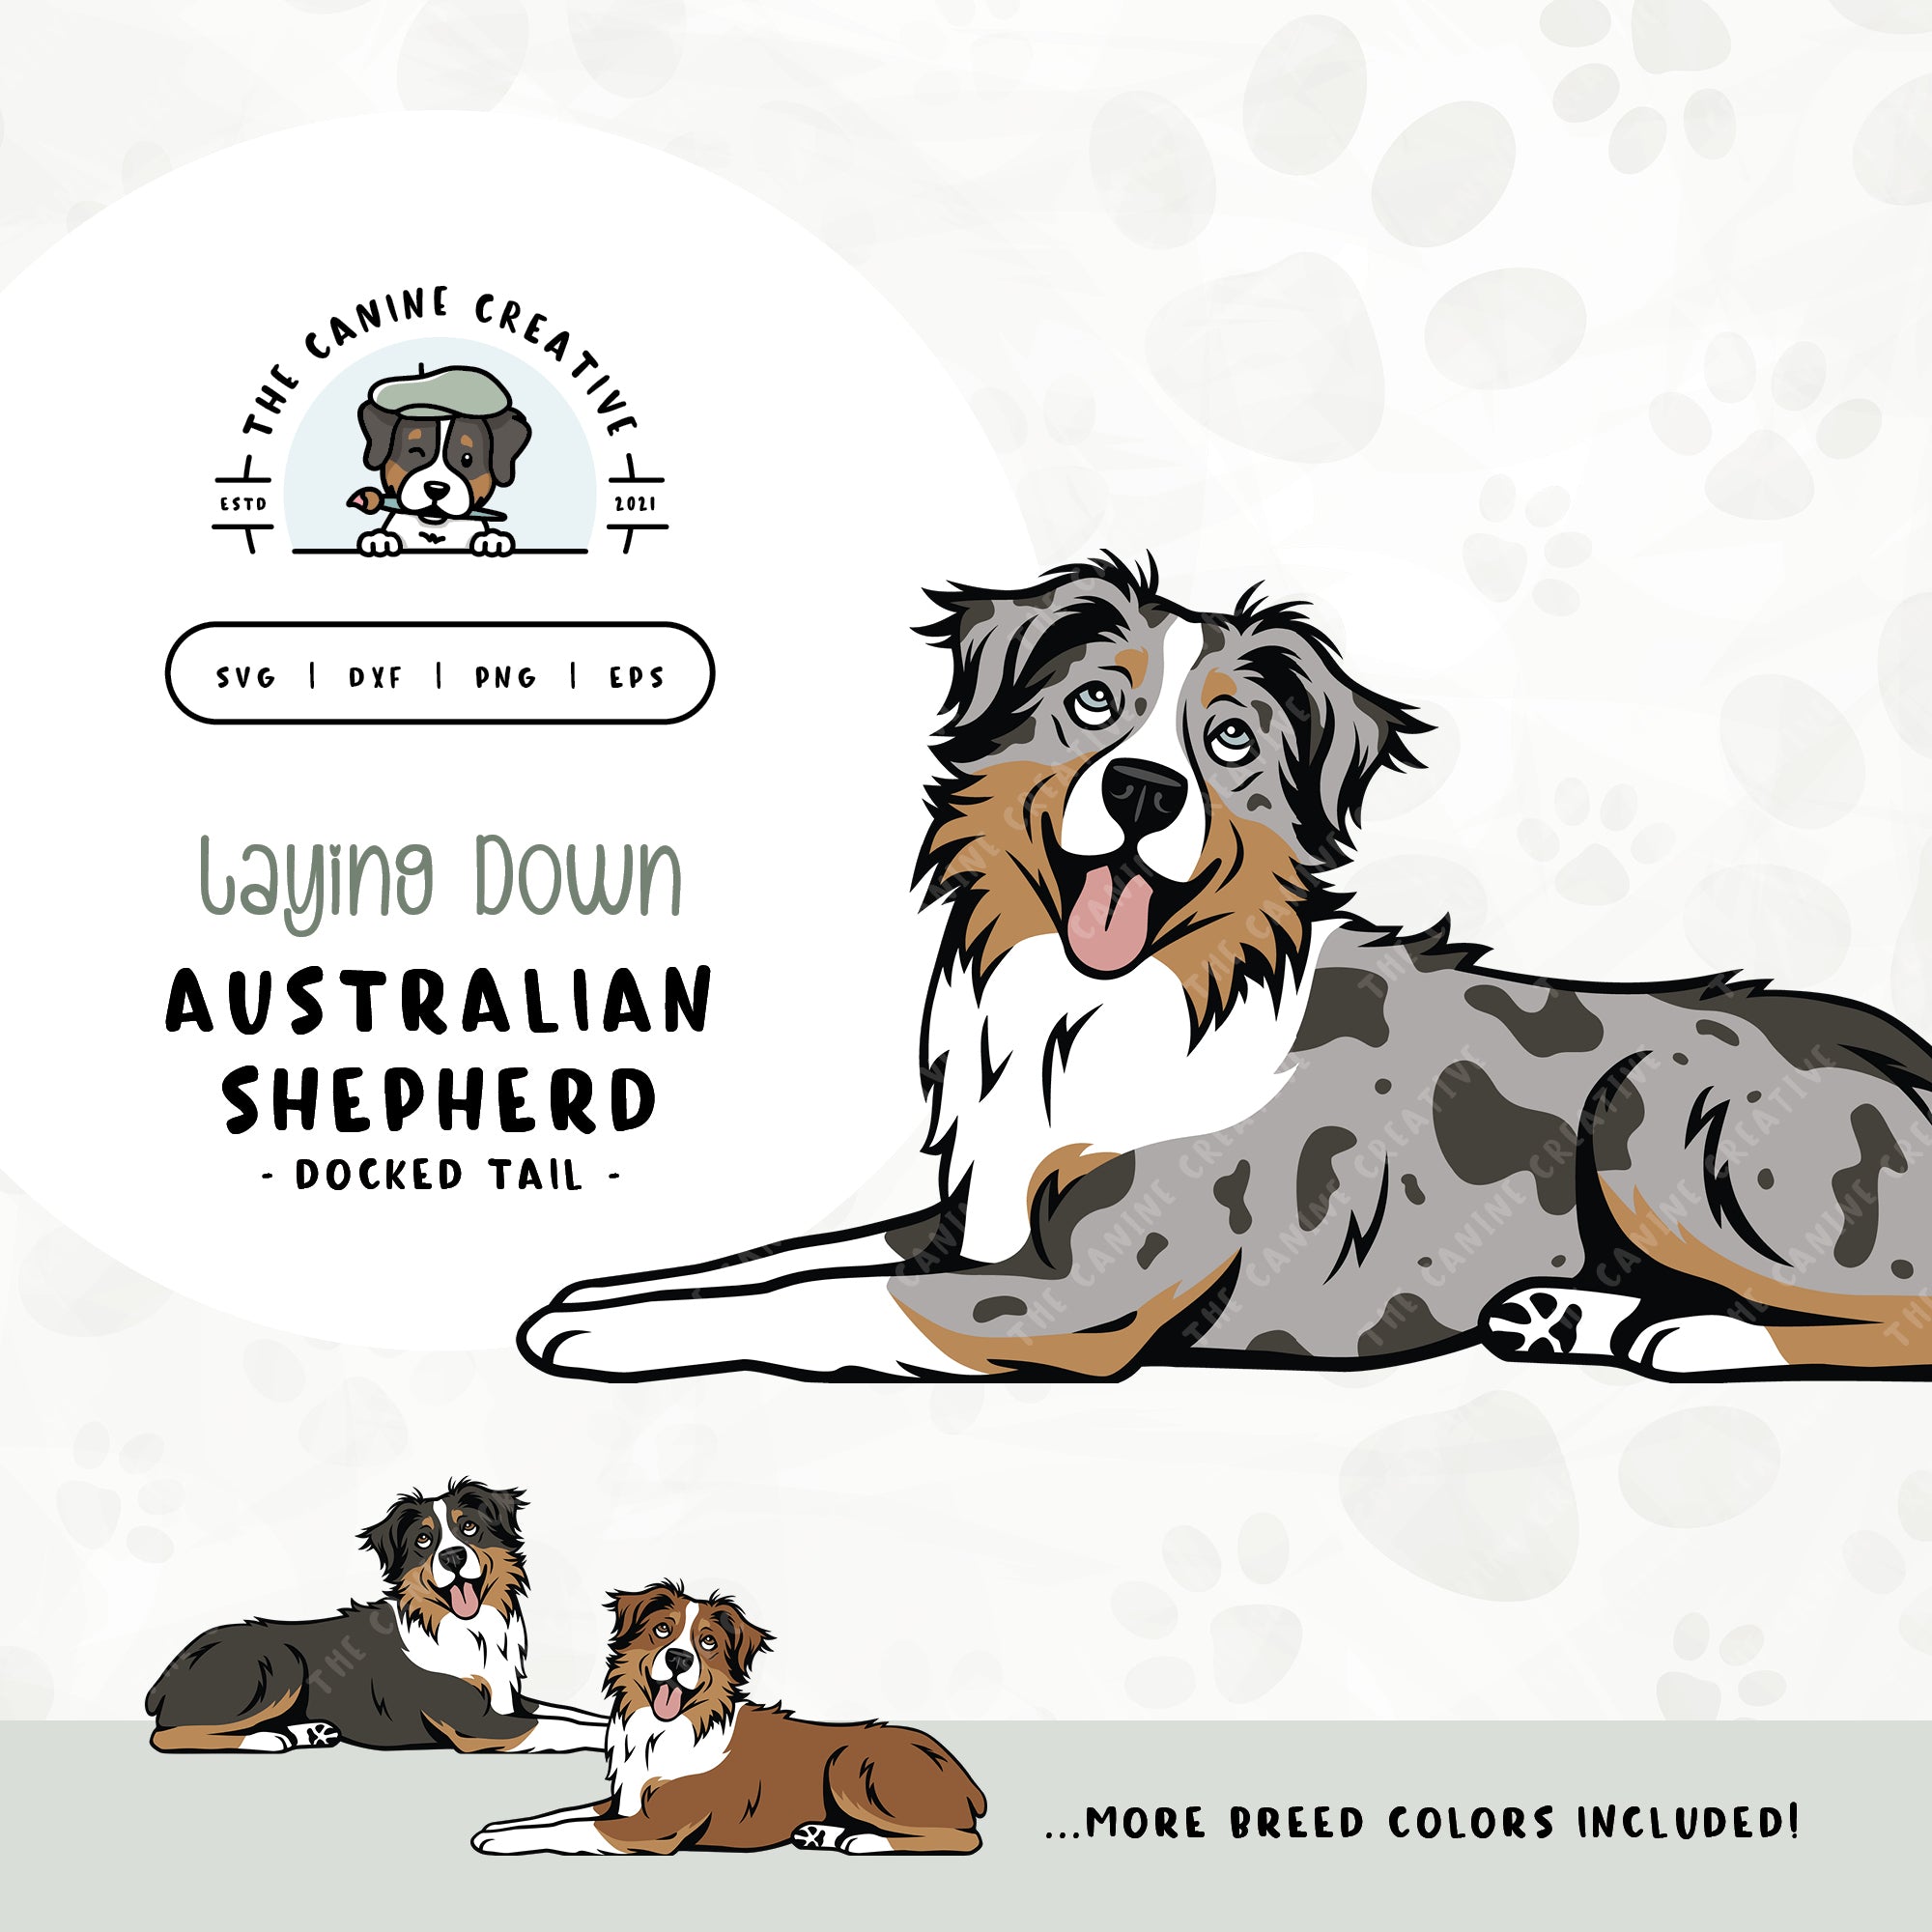 This laying down dog design features an Australian Shepherd with a docked tail. File formats include: SVG, DXF, PNG, and EPS.